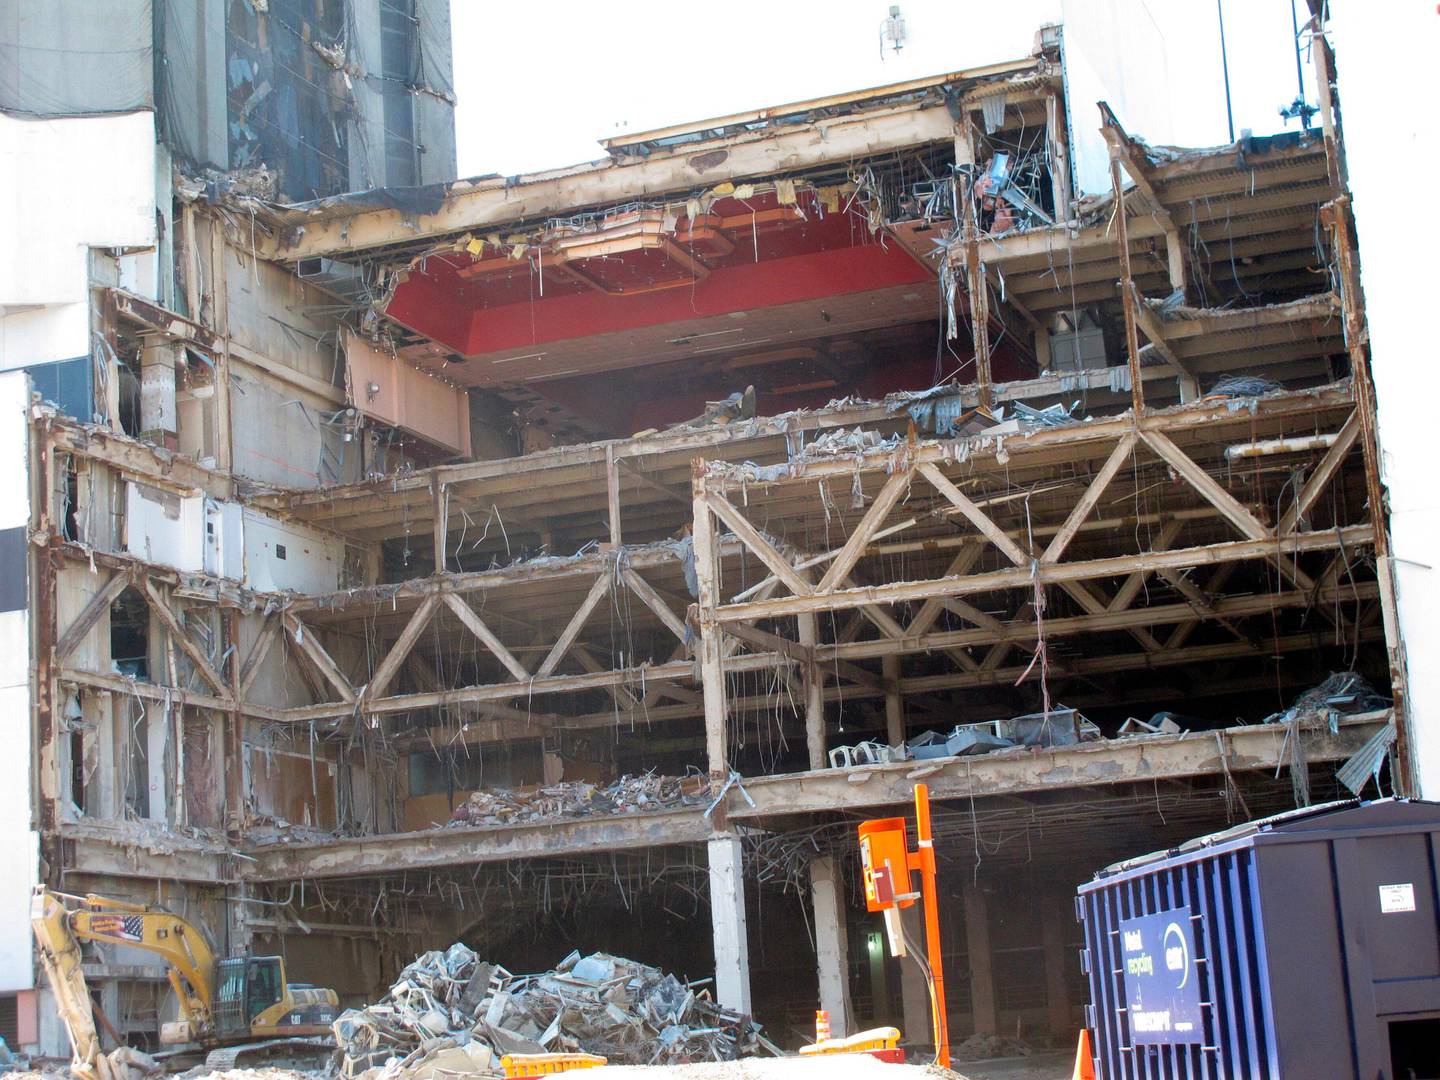 This Oct. 1, 2020 photo shows the partially demolished Trump Plaza casino in Atlantic City, N.J. On Wednesday, Dec. 16, 2020, the city announced it would auction off the right to push the button to dynamite the remainder of the casino next month as a means to raise money for a local youth charity. (AP Photo/Wayne Parry)